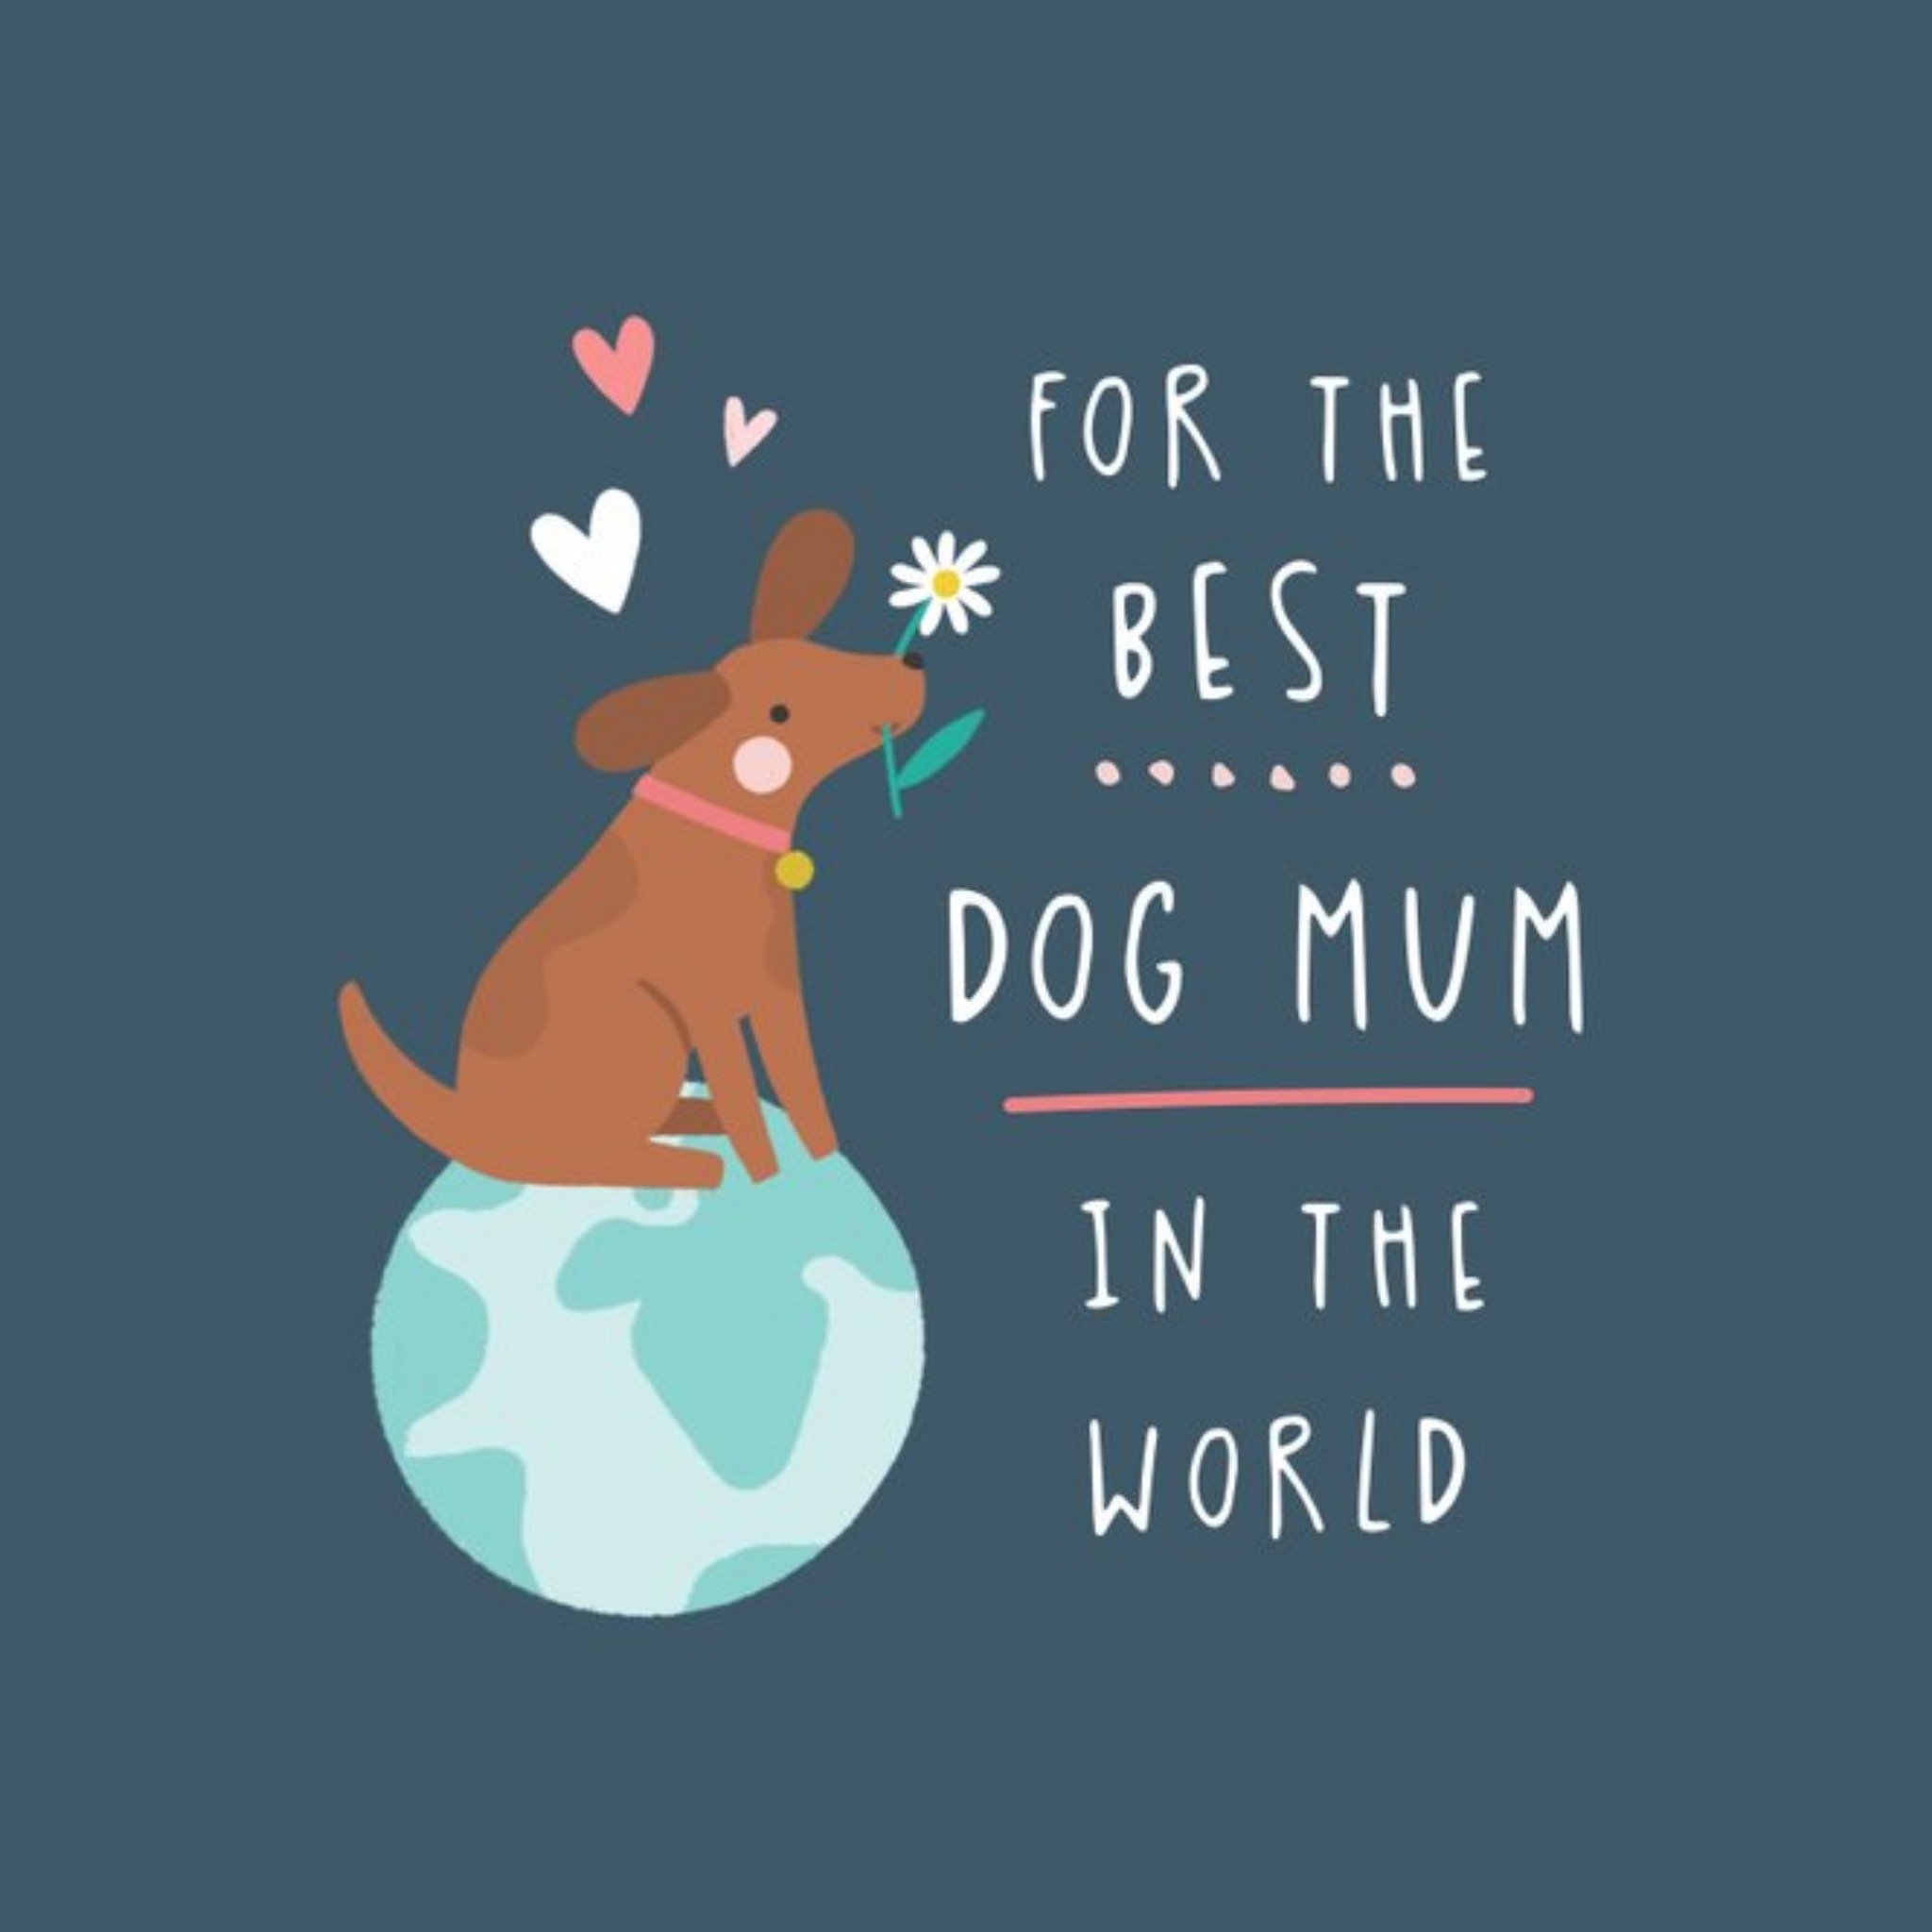 Moonpig Illustration Of A Dog Sitting On Top Of The World From The Dog Mother's Day Card, Square